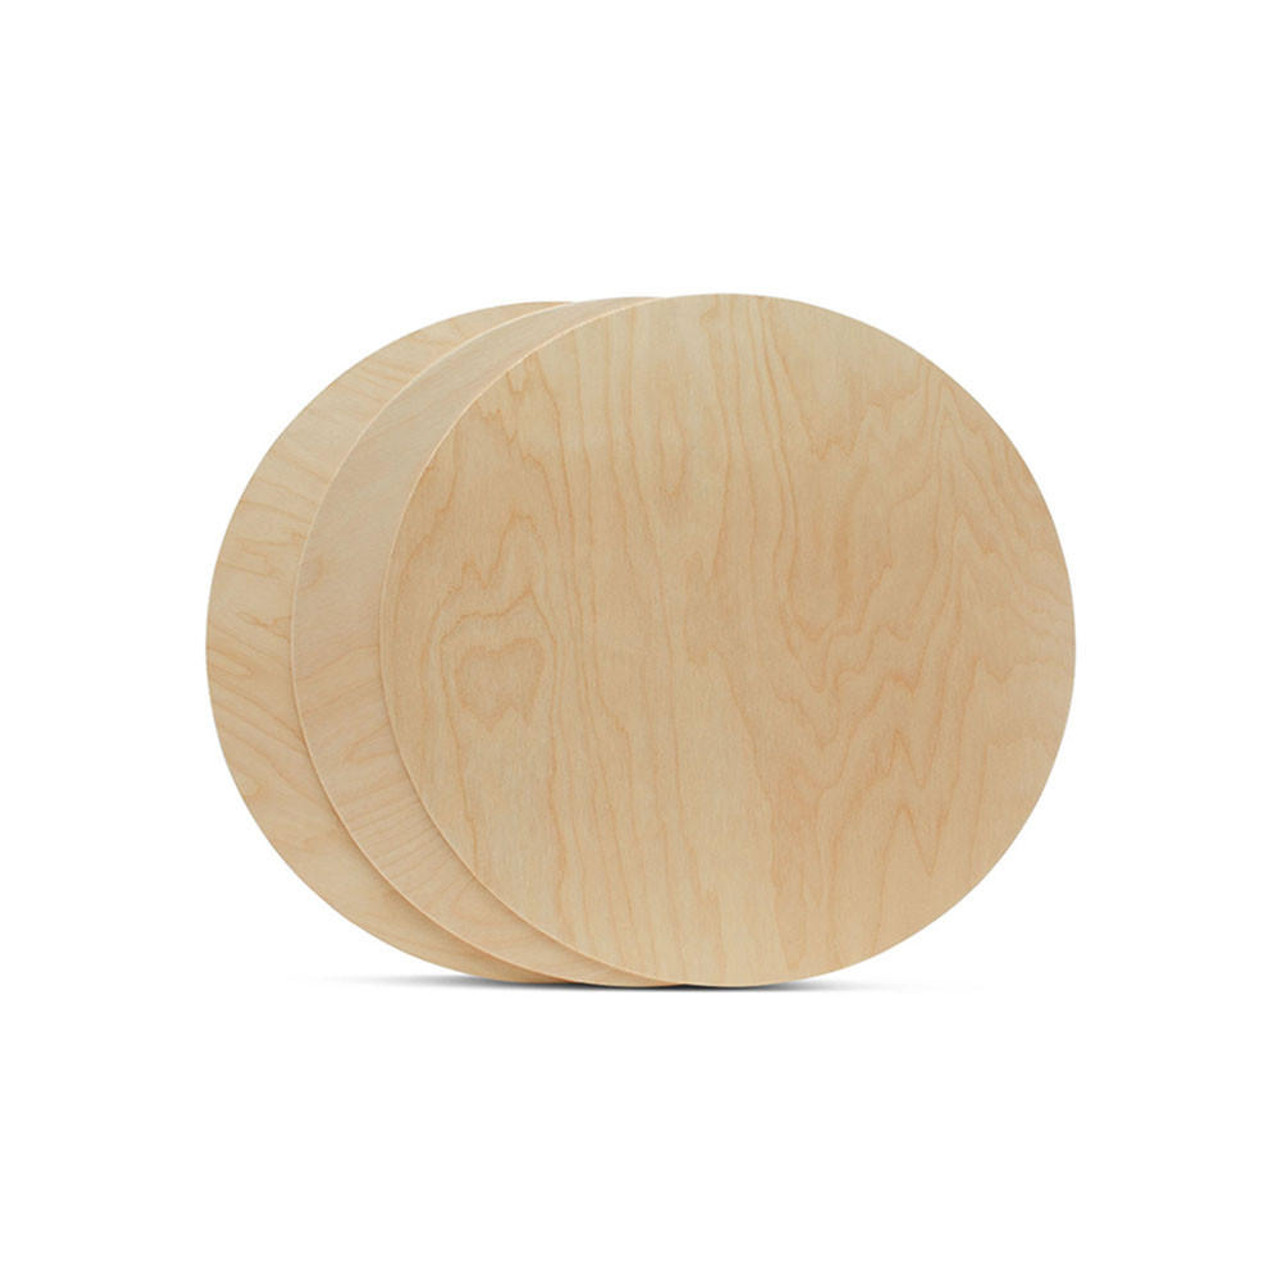 Wood Circles 12 inch 1/2 inch Thick, Unfinished Birch Plaques, Pack of 5 Wooden  Circles for Crafts and Blank Sign Rounds, by Woodpeckers 